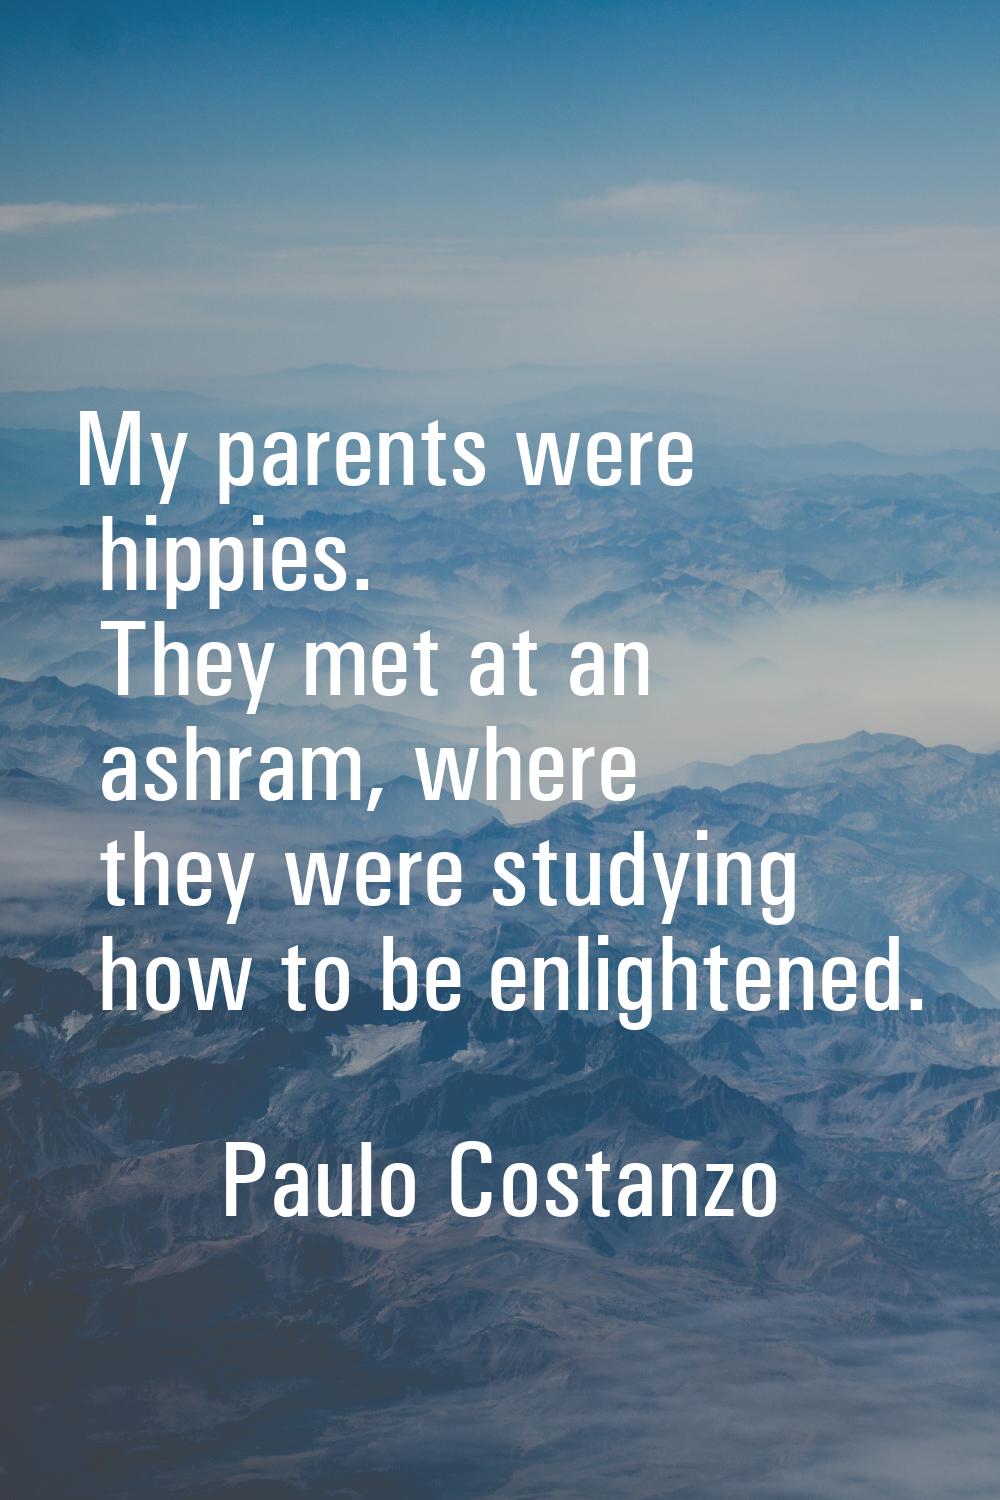 My parents were hippies. They met at an ashram, where they were studying how to be enlightened.